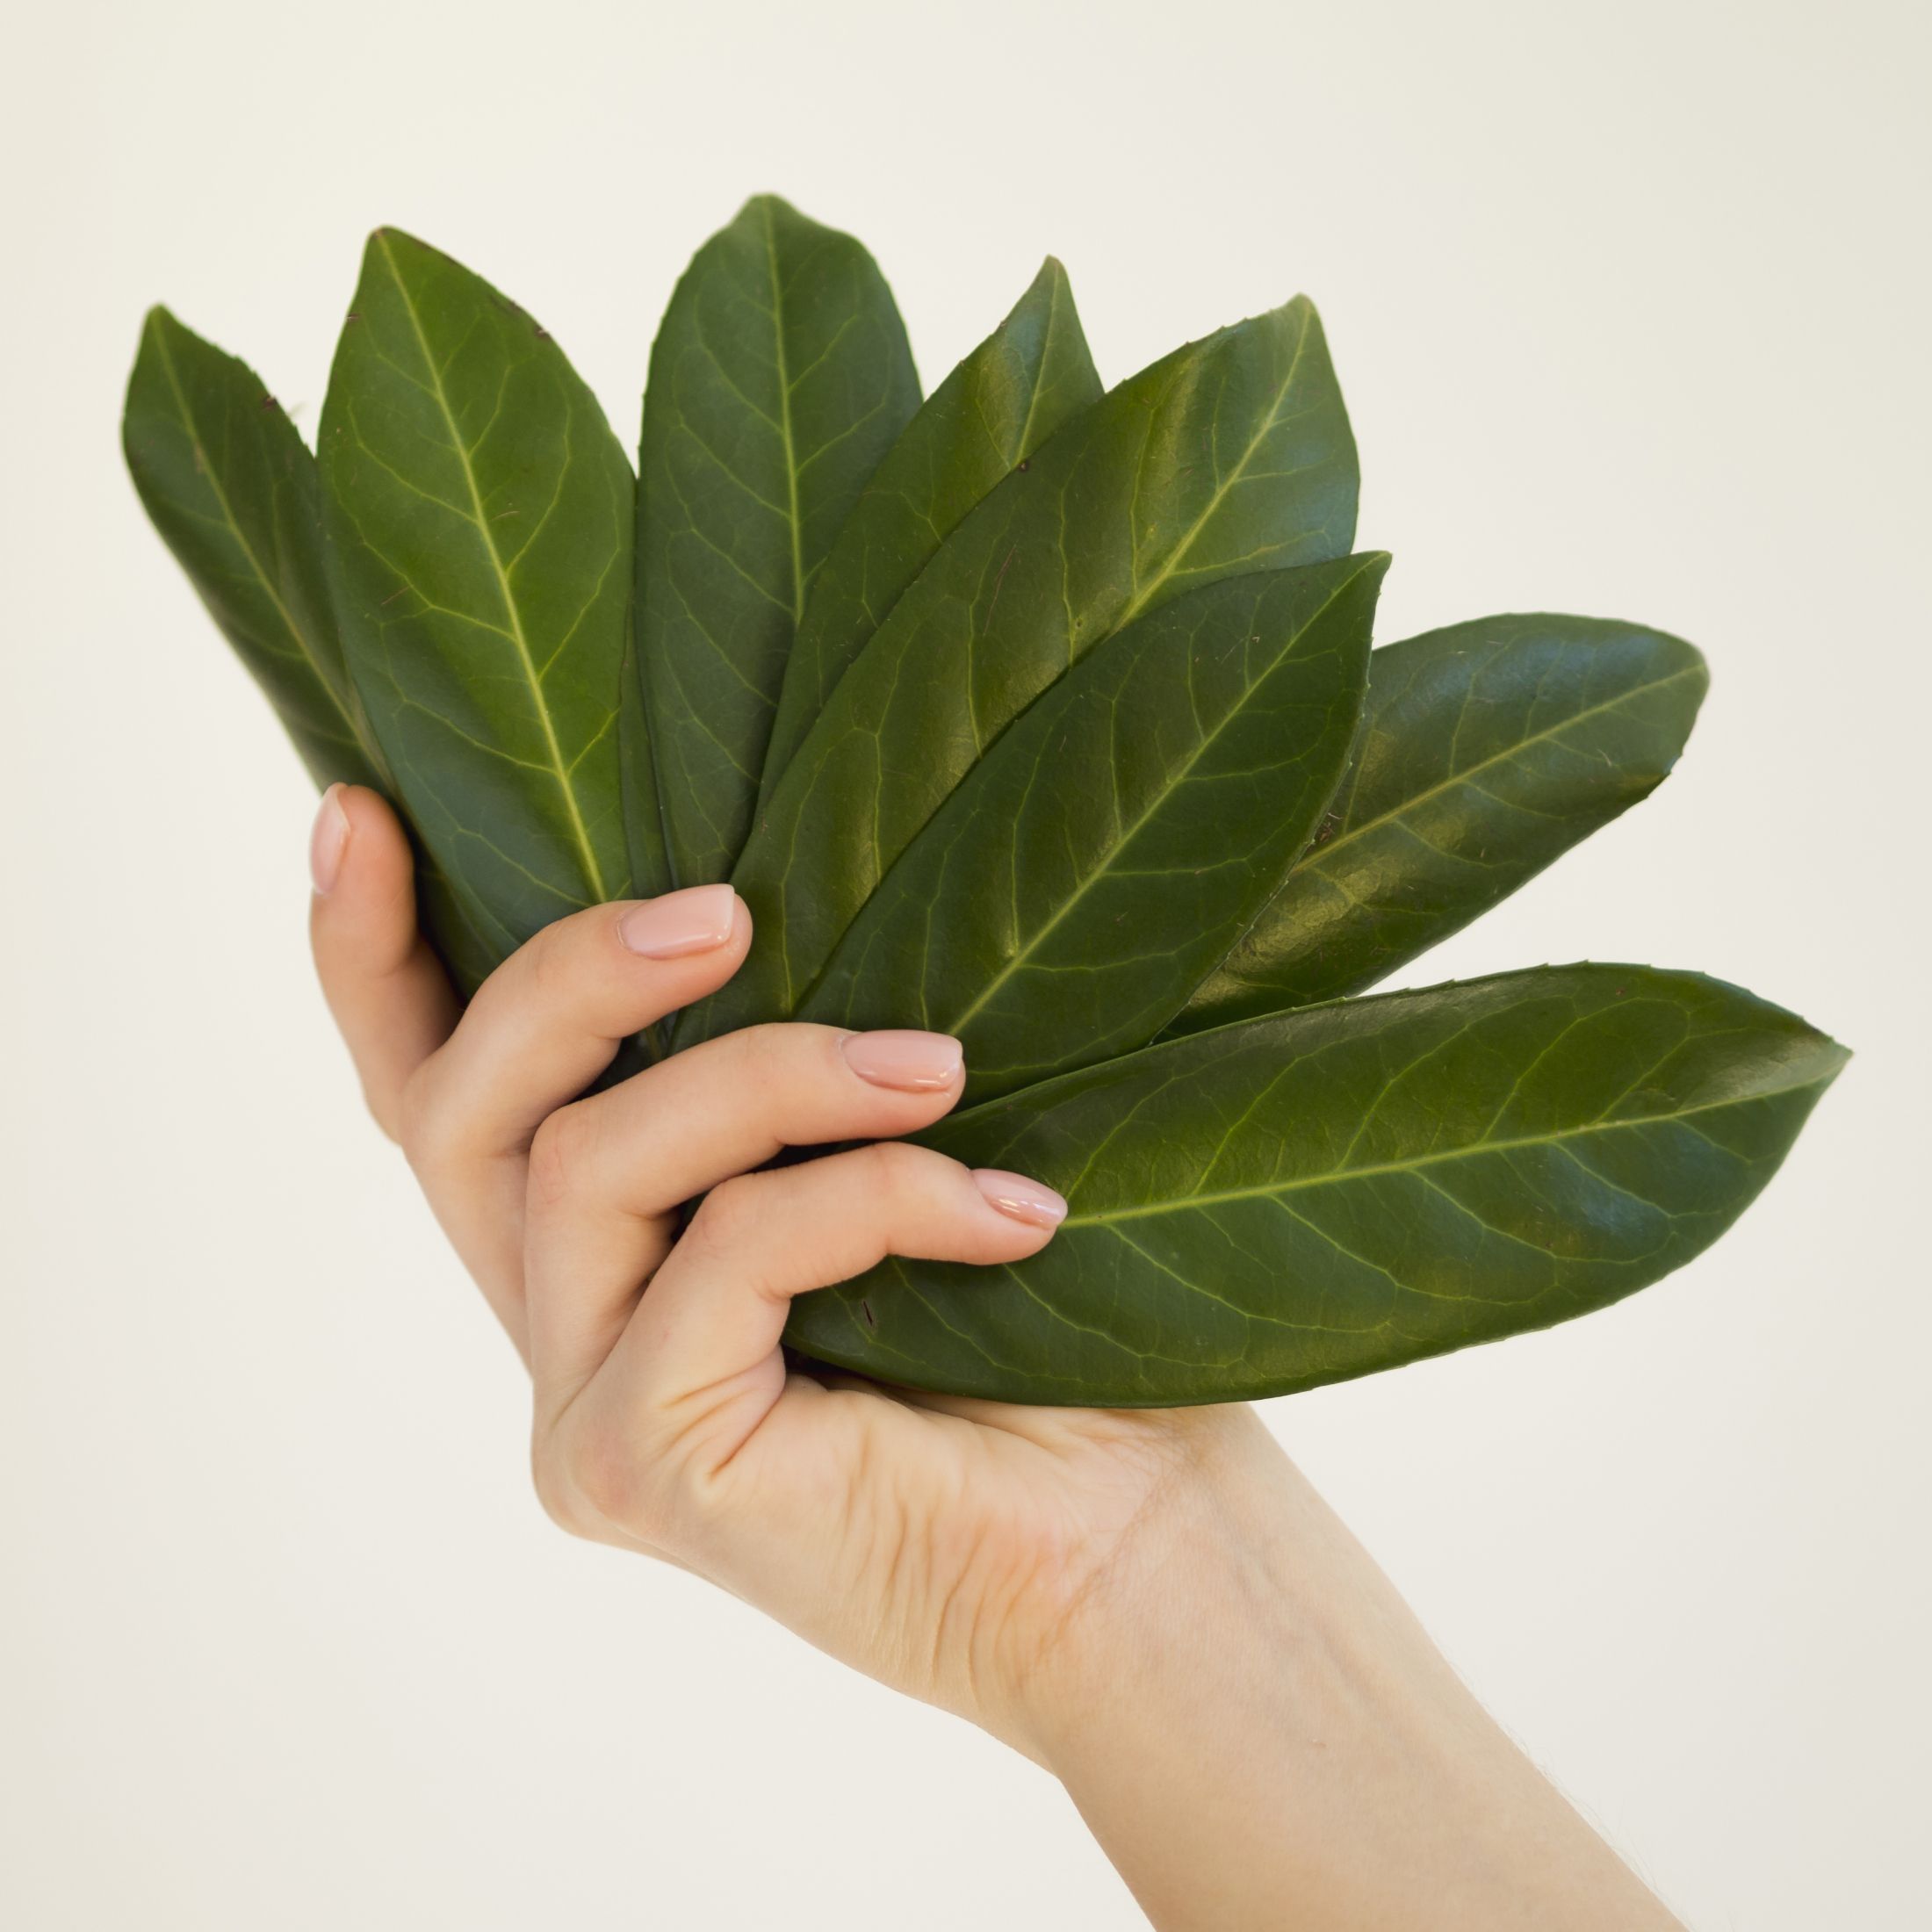 close-up-view-of-hand-holding-a-leaf.jpg